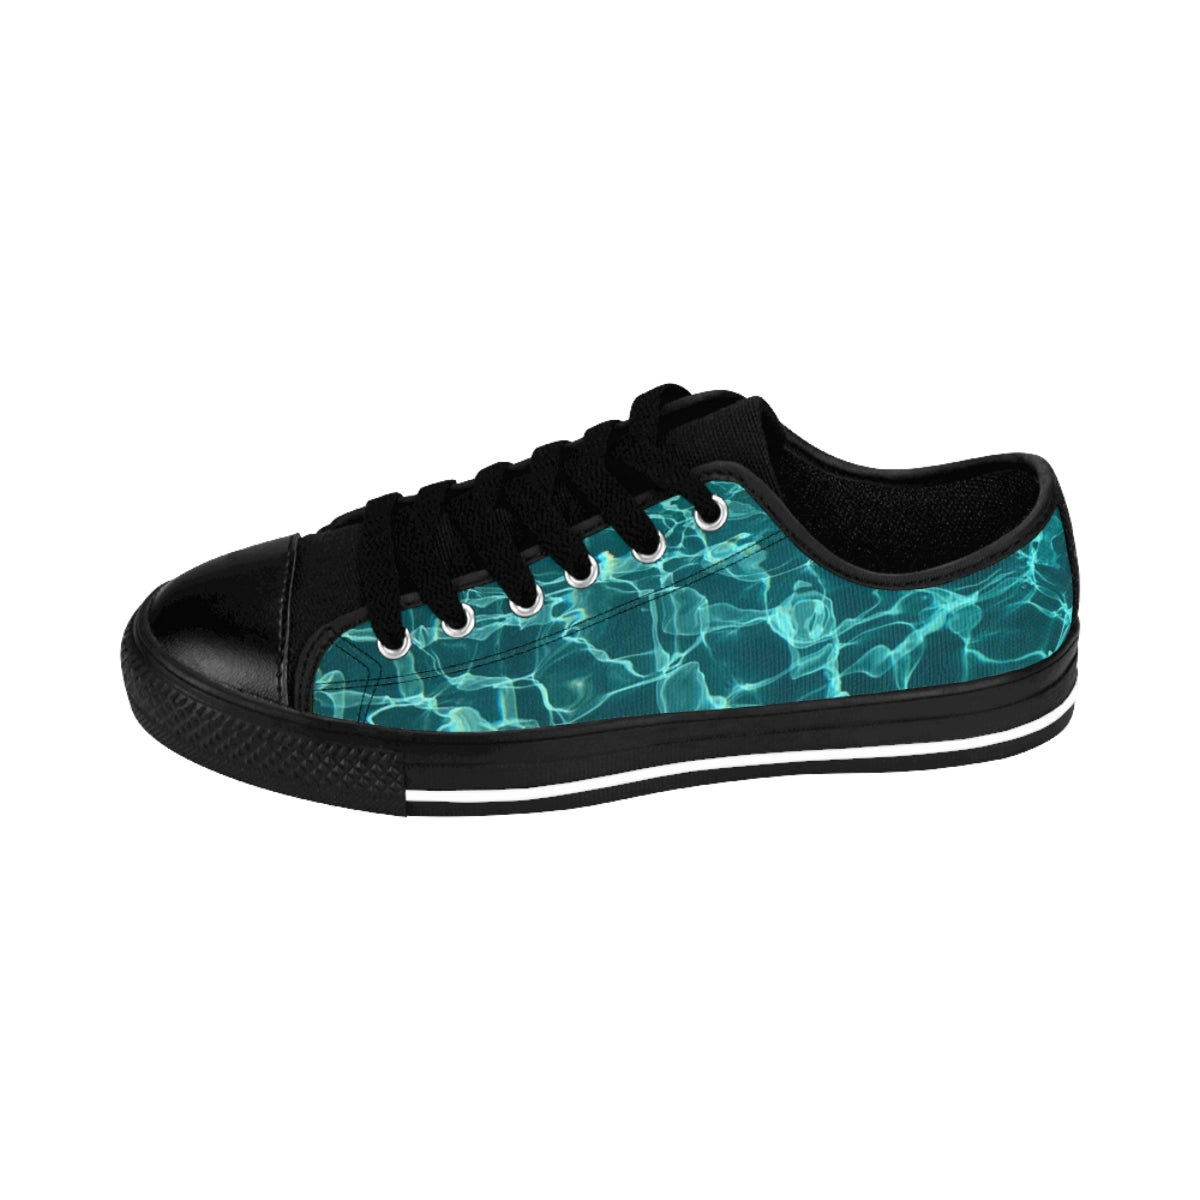 Women's Sneakers Turquoise color design